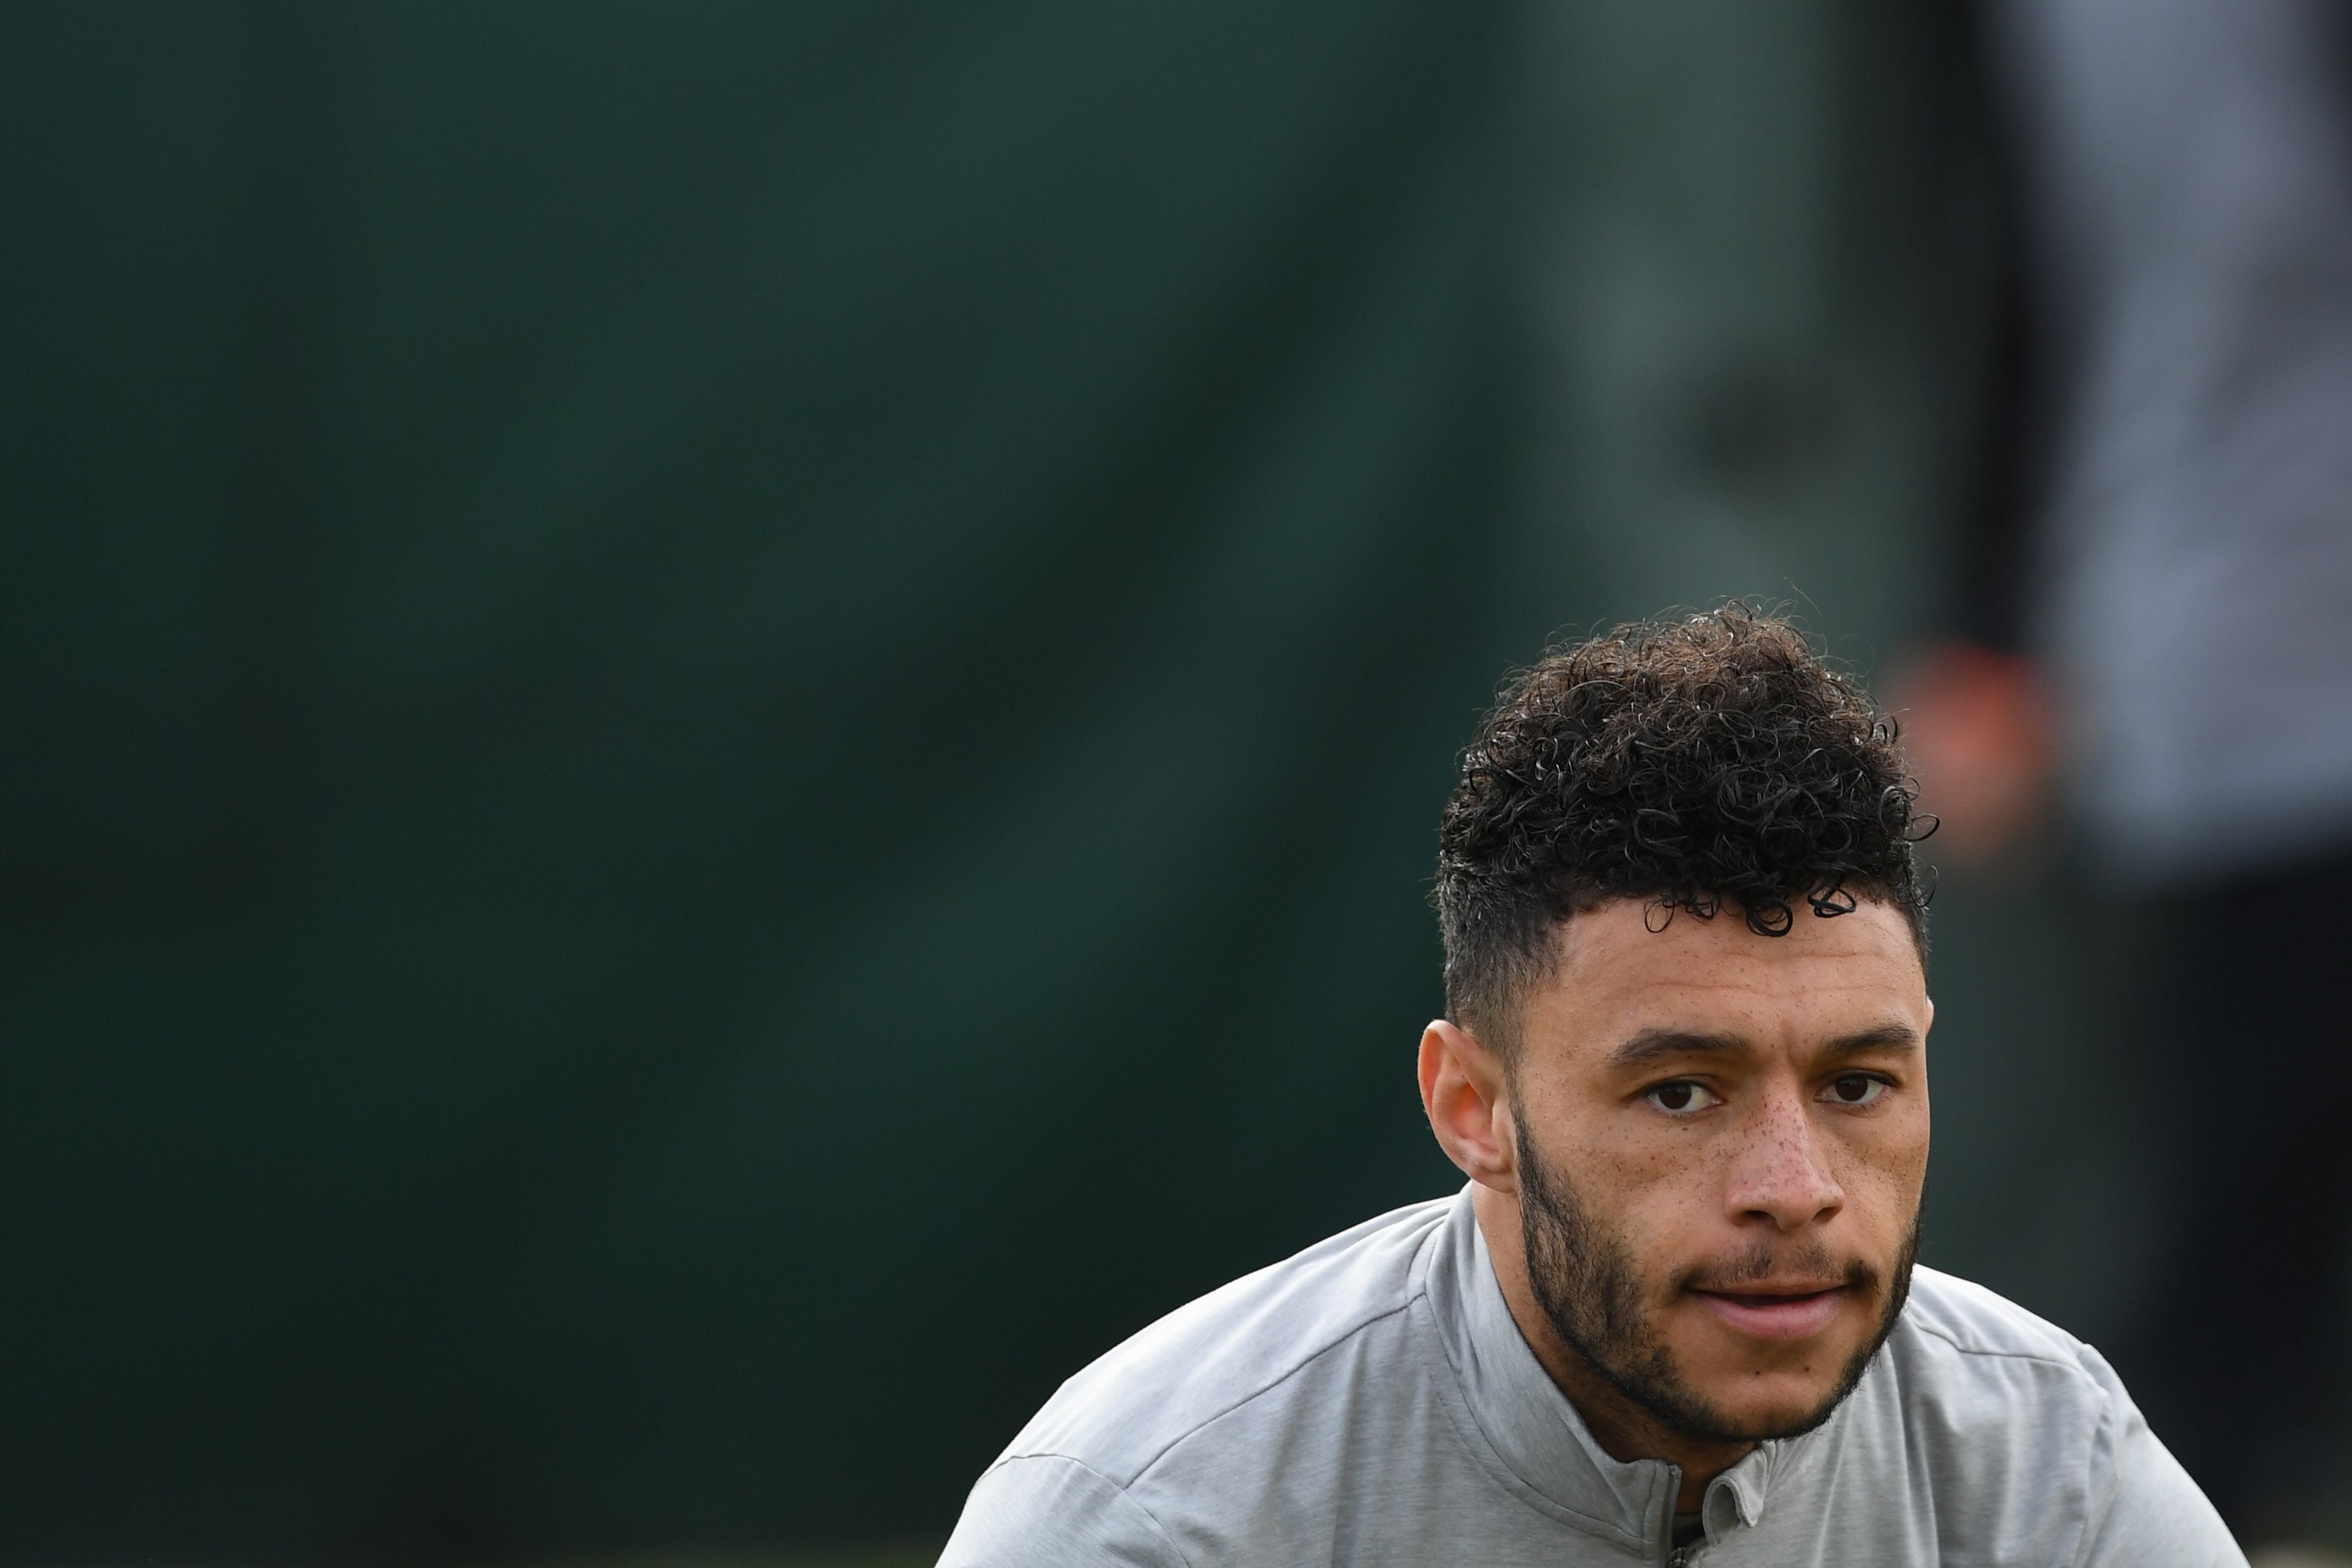 Liverpool's English midfielder Alex Oxlade-Chamberlain attends a team training session on the eve of the UEFA Champions League first leg quarter-final football match between Liverpool and Manchester City, at Melwood Training Ground in Liverpool, north west England on April 3, 2018. / AFP PHOTO / Paul ELLIS        (Photo credit should read PAUL ELLIS/AFP/Getty Images)